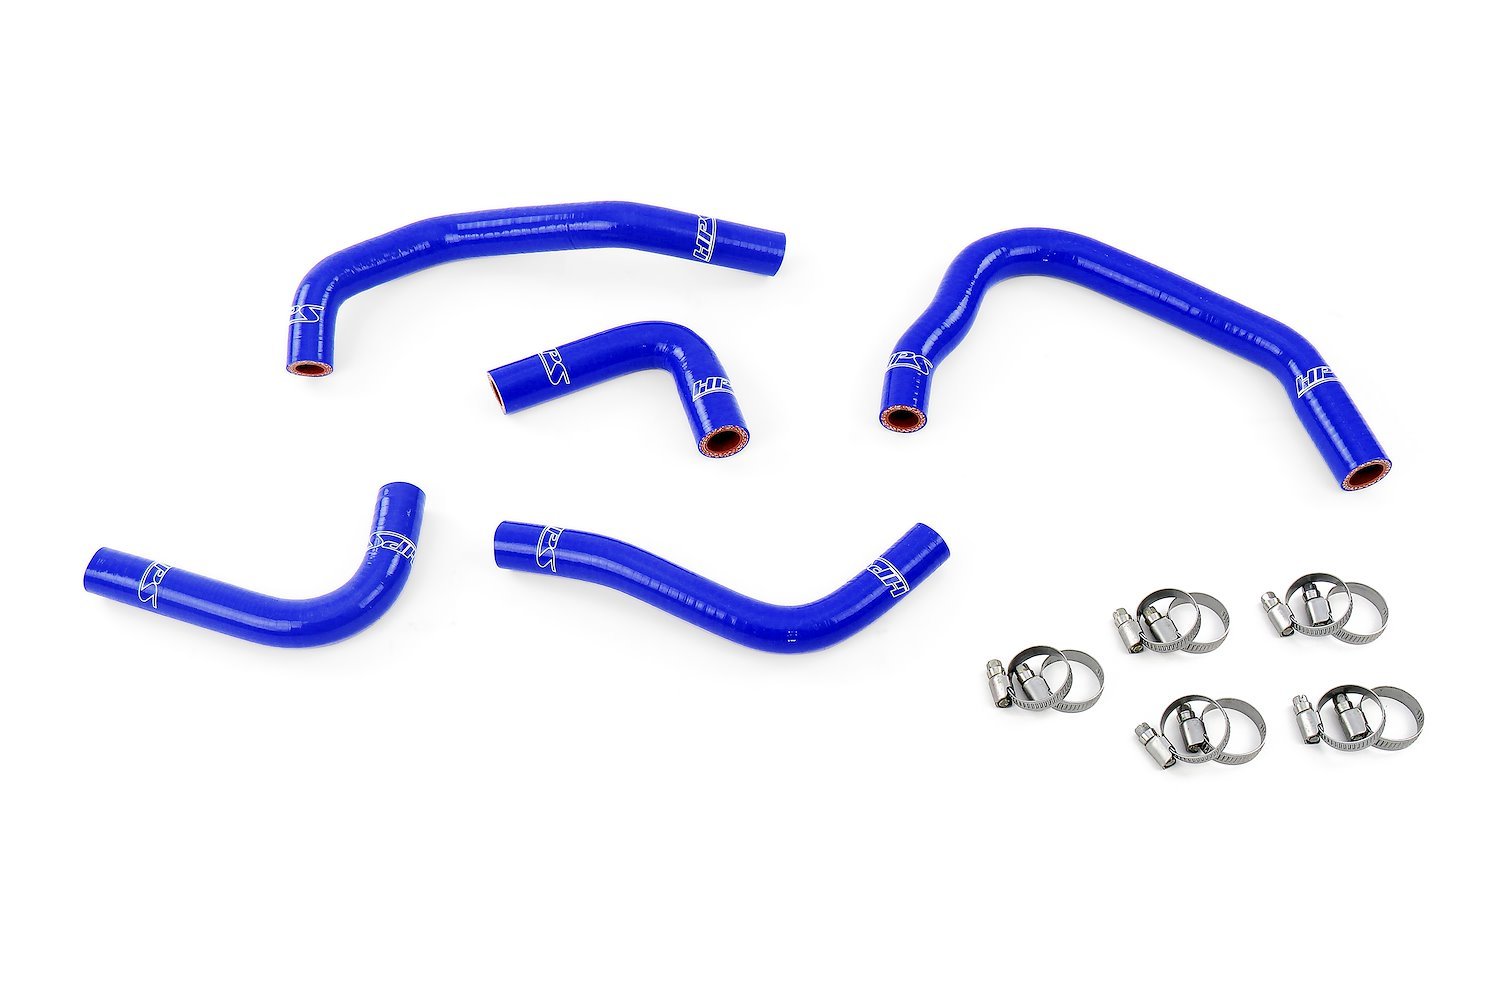 57-1285H-BLUE Heater Hose Kit, High-Temp 3-Ply Reinforced Silicone, Replace OEM Rubber Heater Coolant Hoses